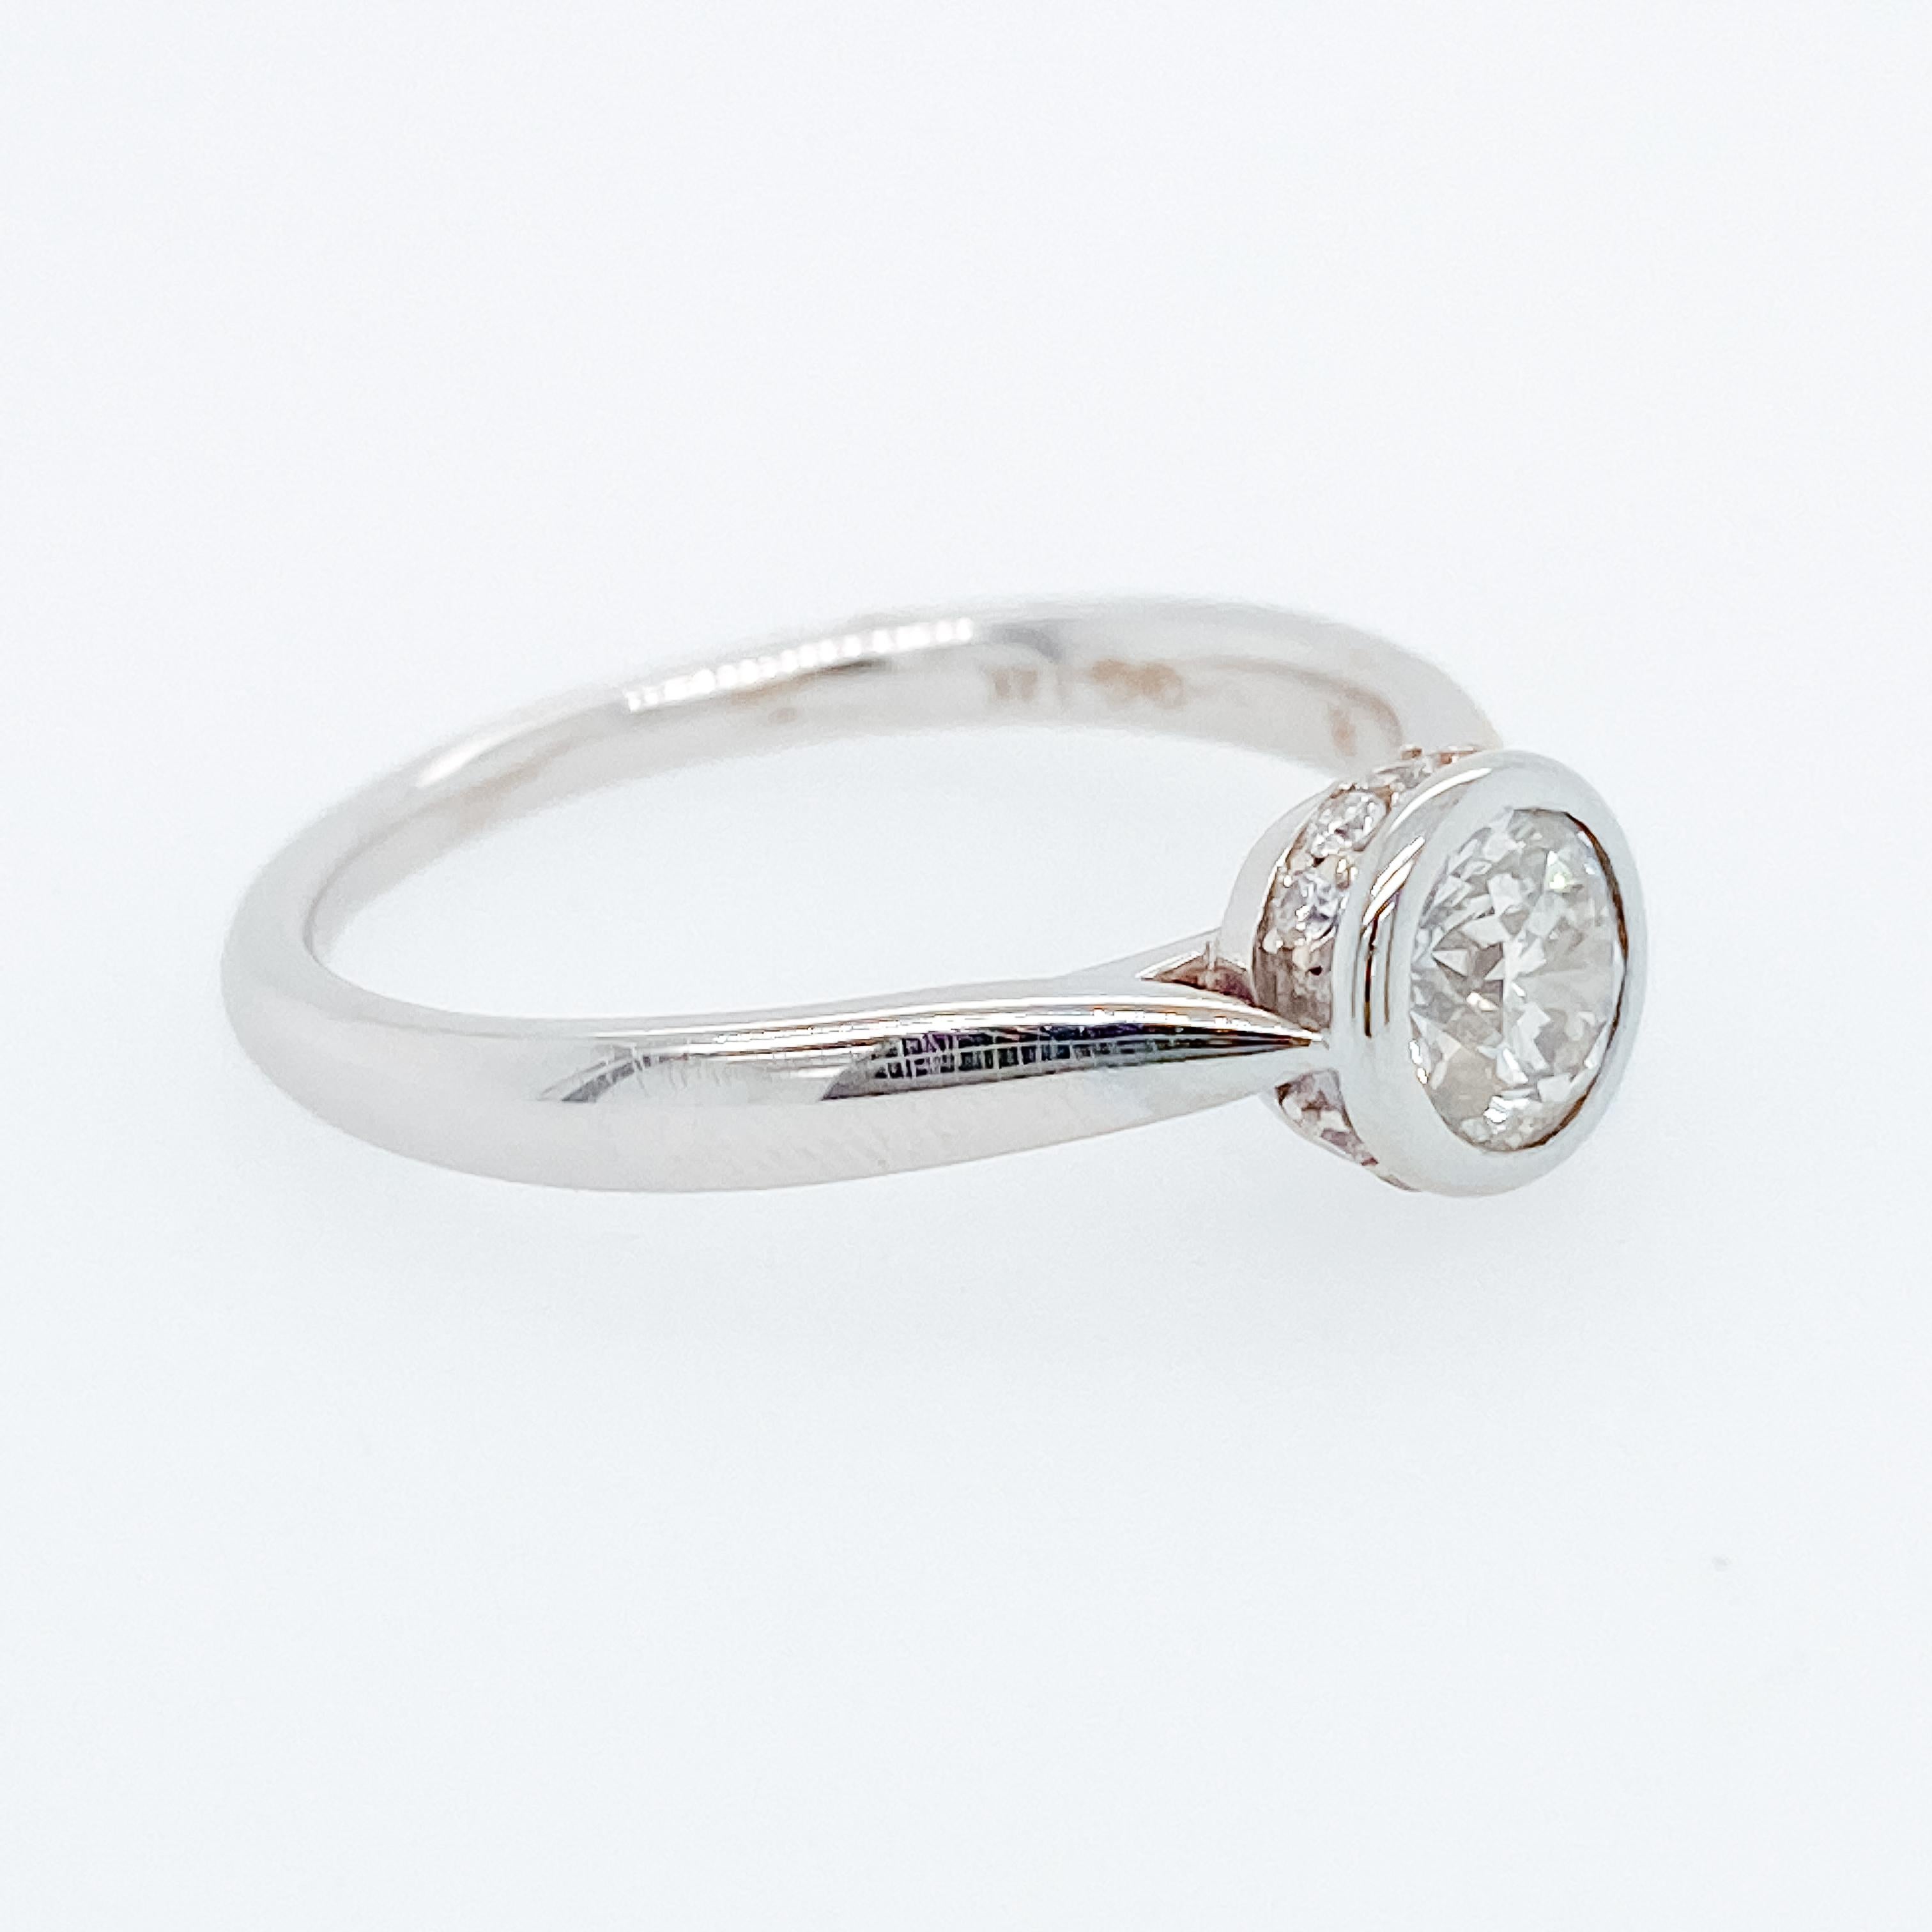 This gorgeous diamond engagement ring has a round brilliant cut diamond set in a glorious bezel w a hidden halo of diamond below. Everything about this ring is elegant and our jeweler that made it wanted it to be one that you could wear with